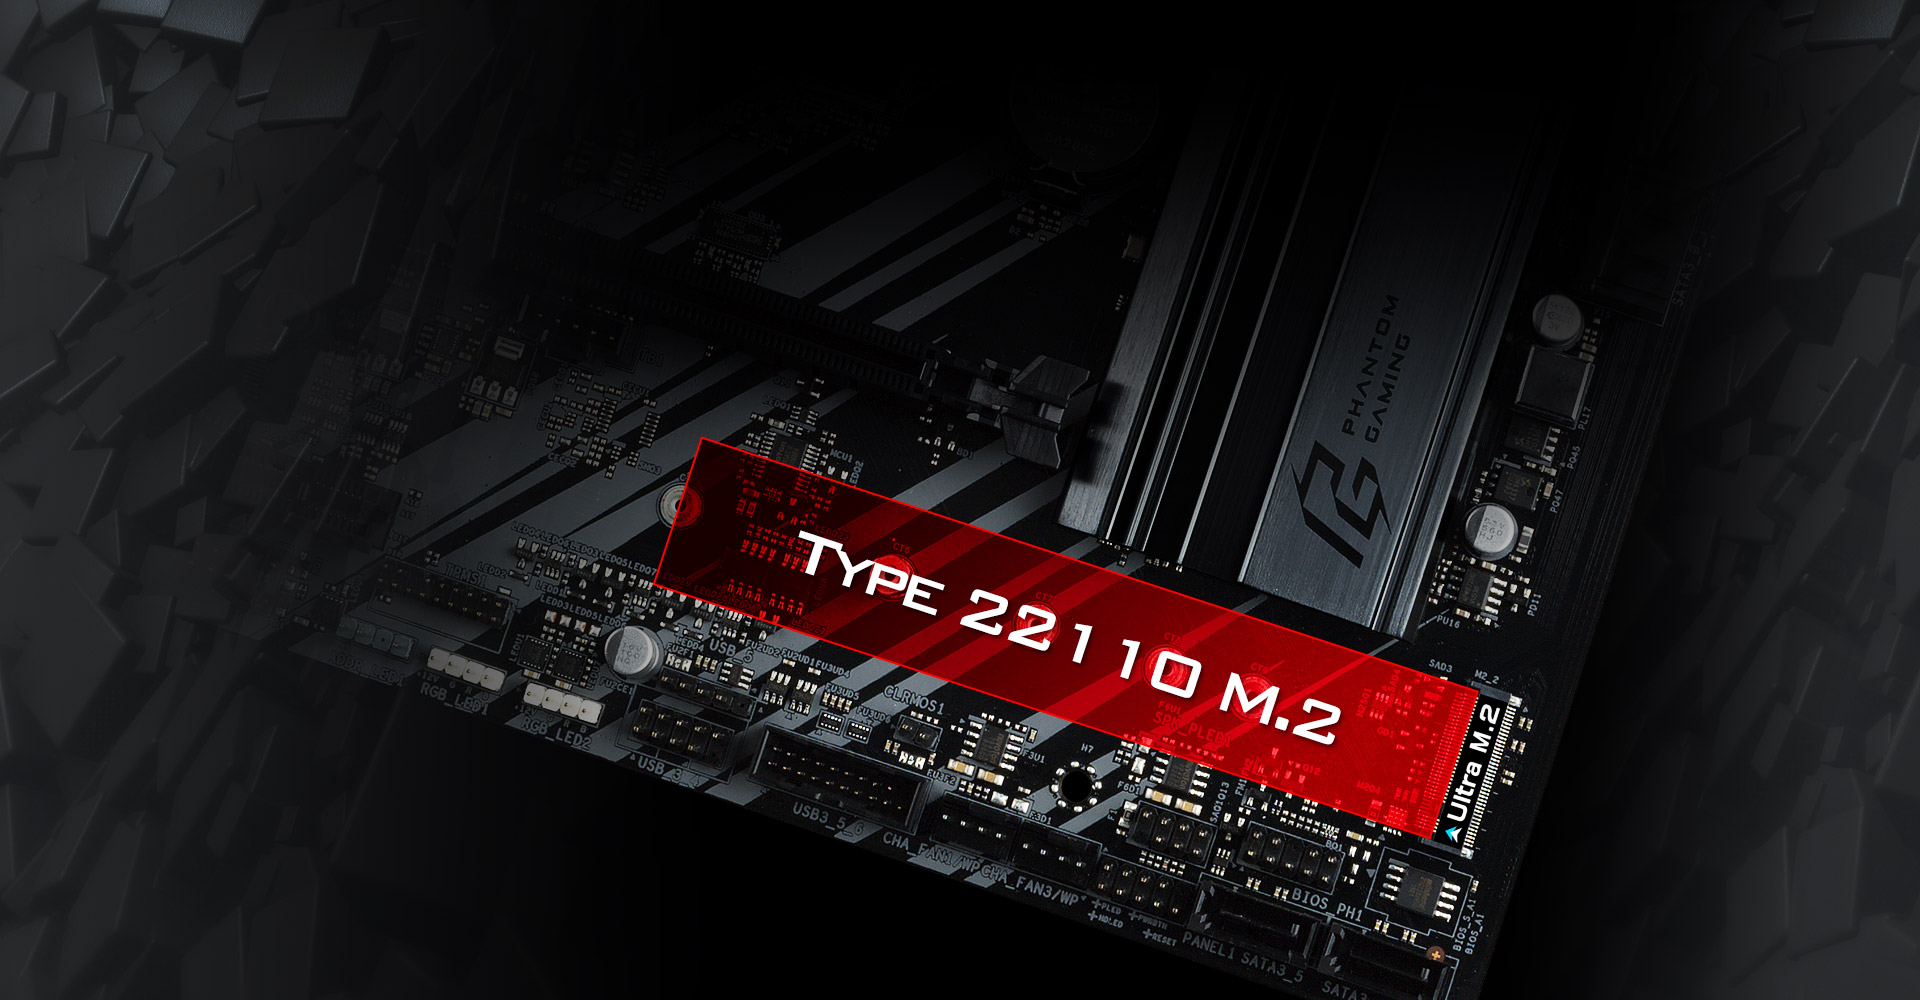 closeup red graphic highlight of the type 22110 m.2 slot on the ASRock z390 motherboard